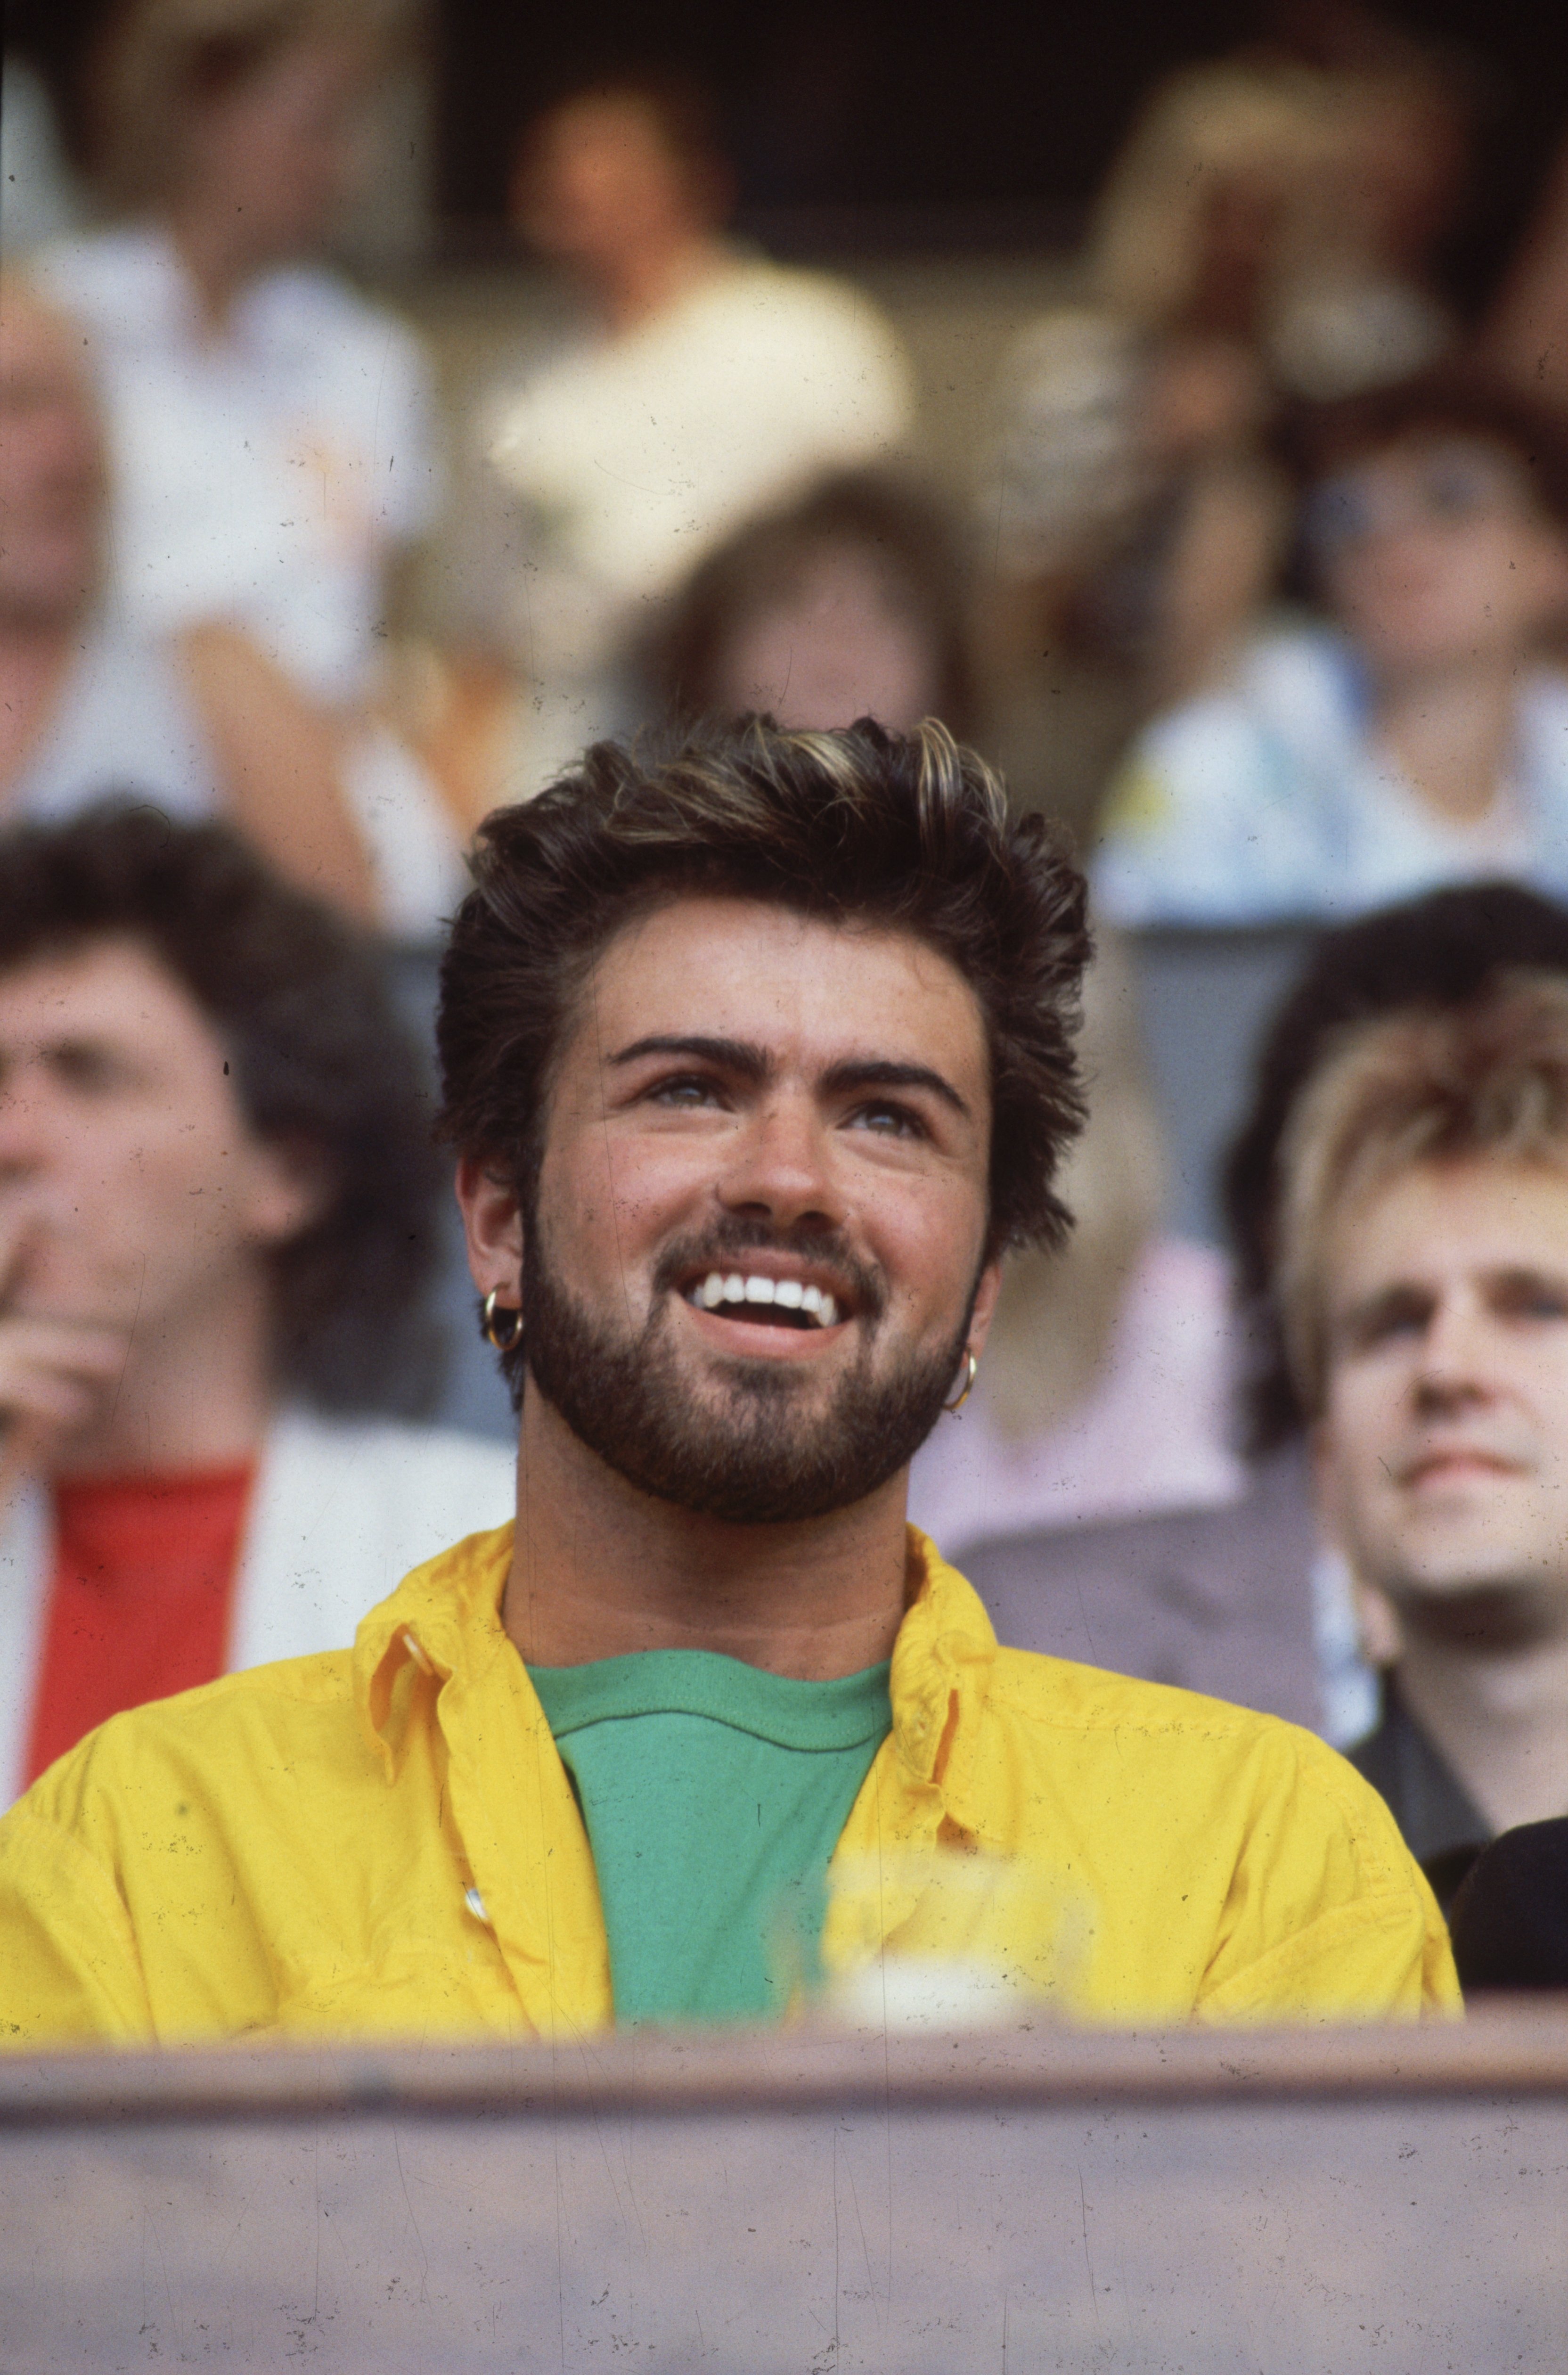 British singer George Michael at the Live Aid Concert in Wembley Stadium, London. | Source: Getty Images